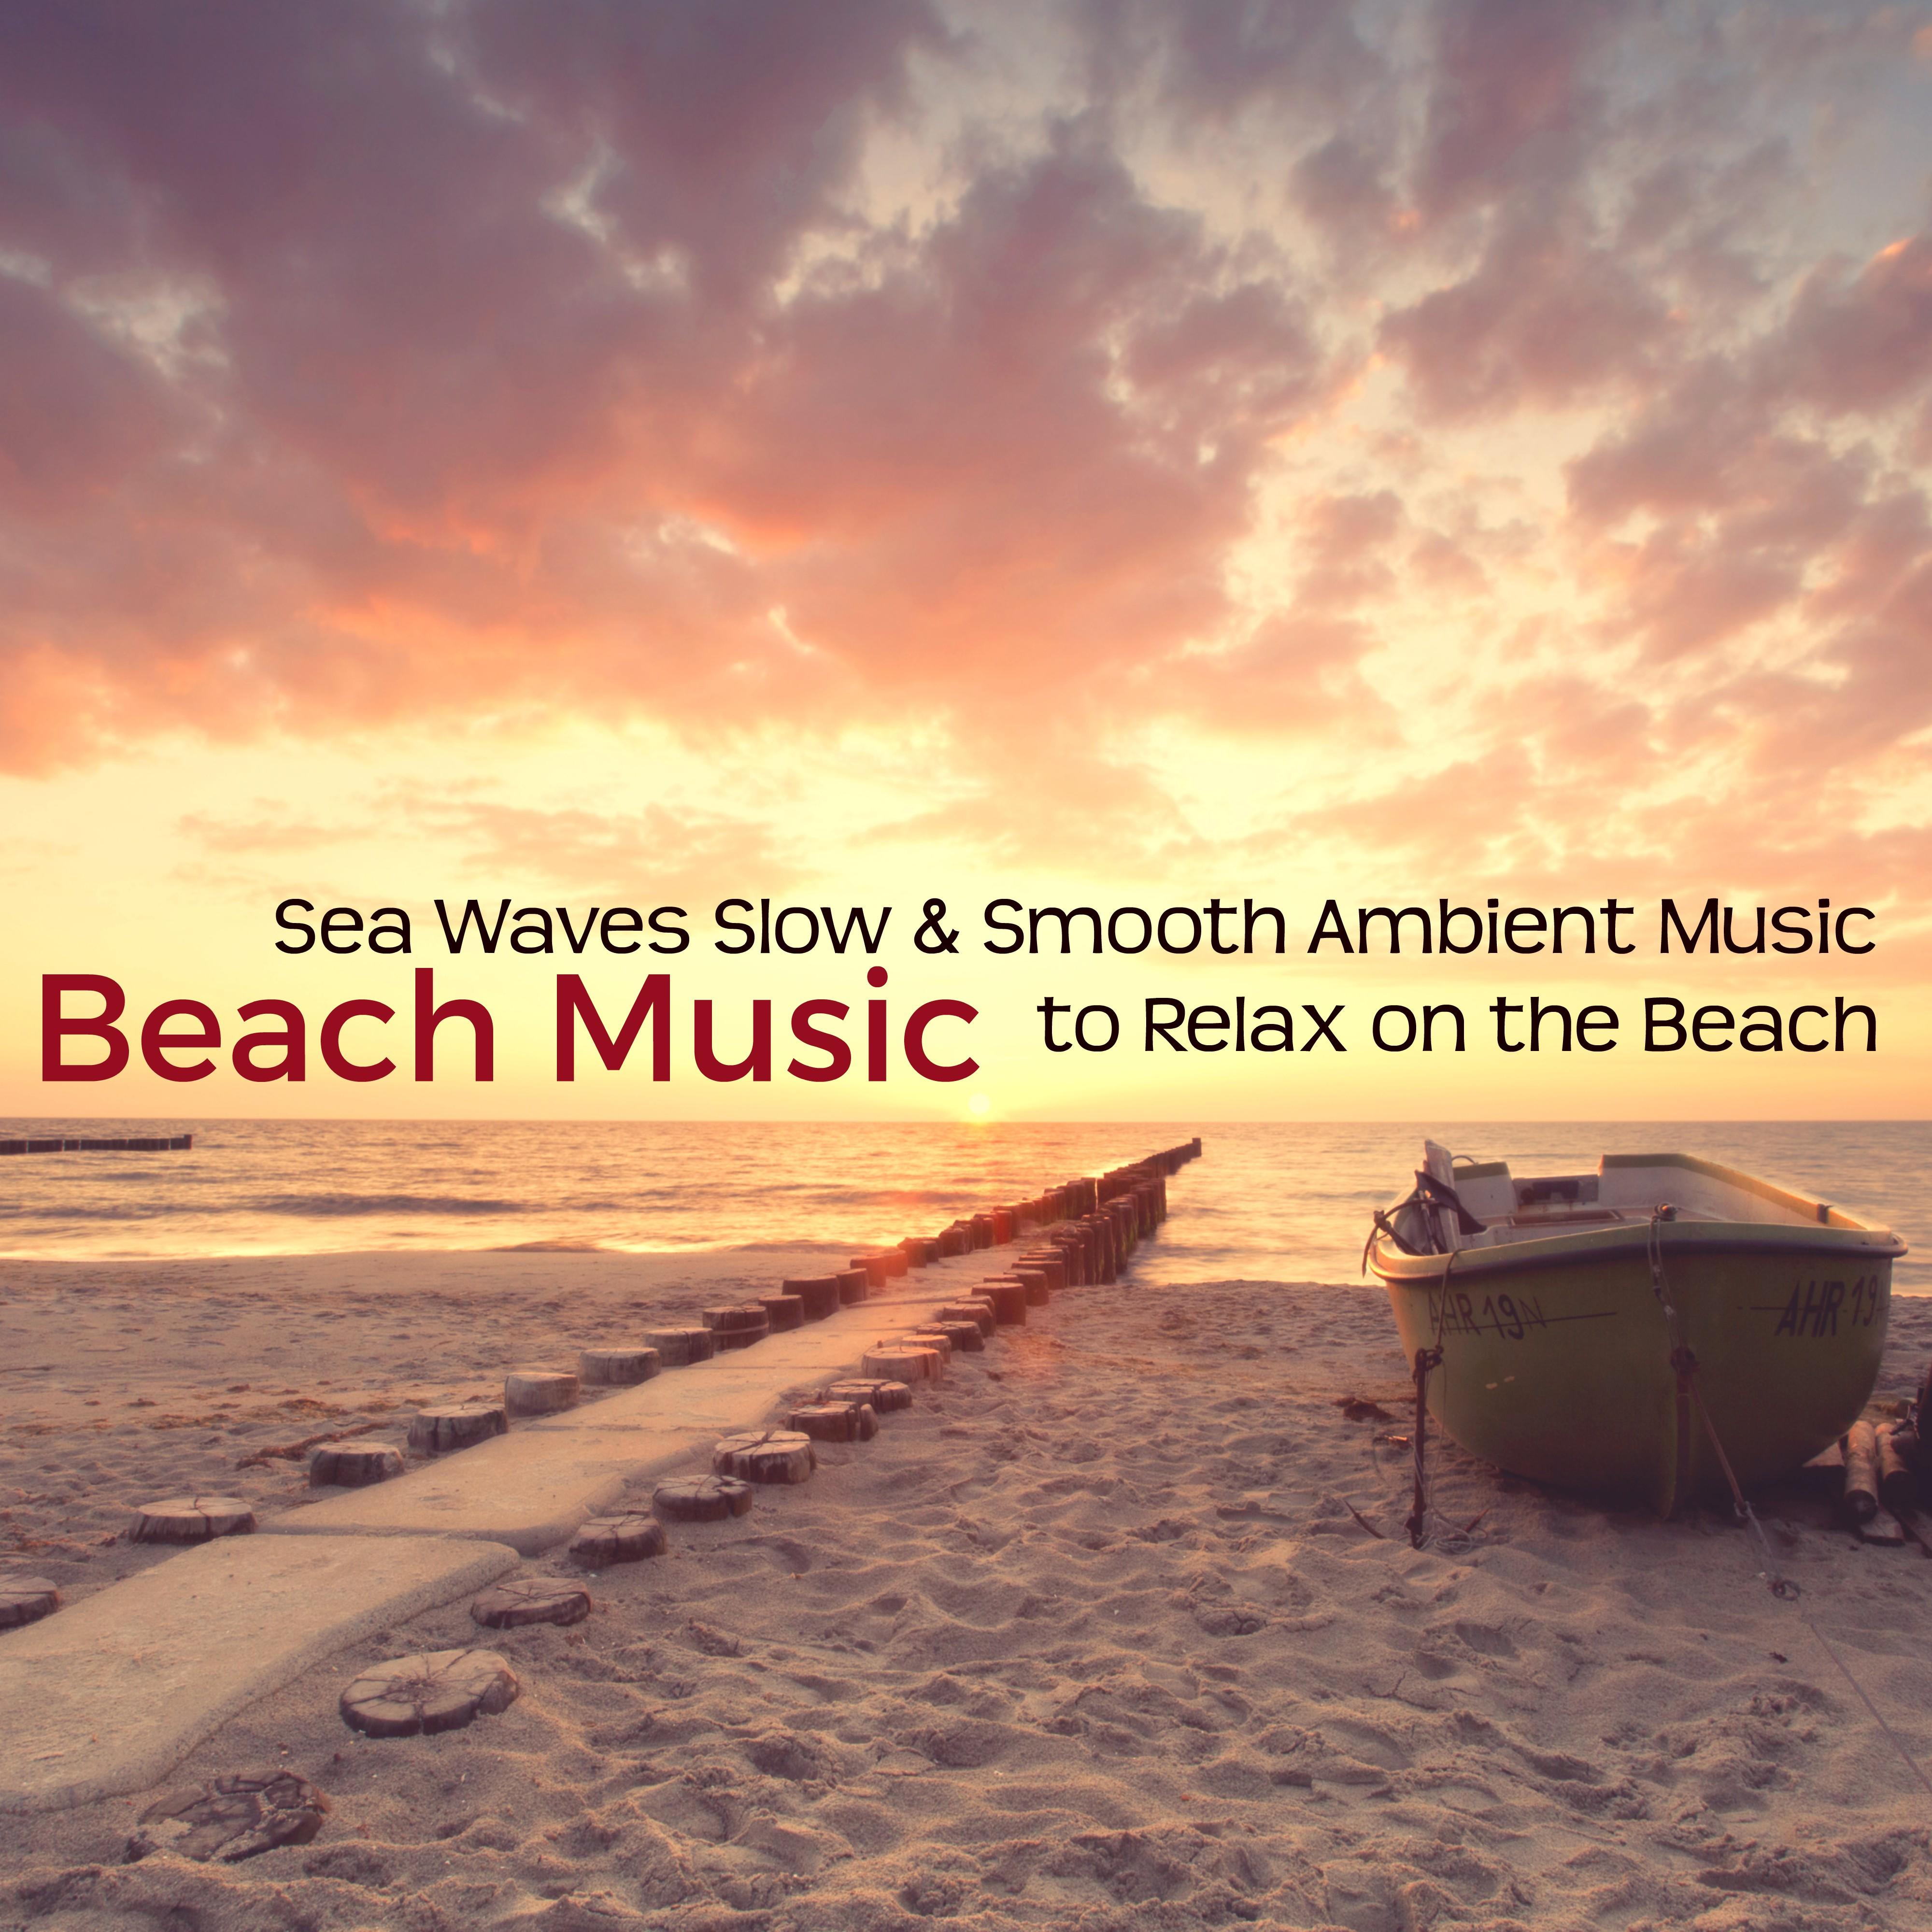 Beach Music – Sea Waves Slow & Smooth Ambient Music to Relax on the Beach